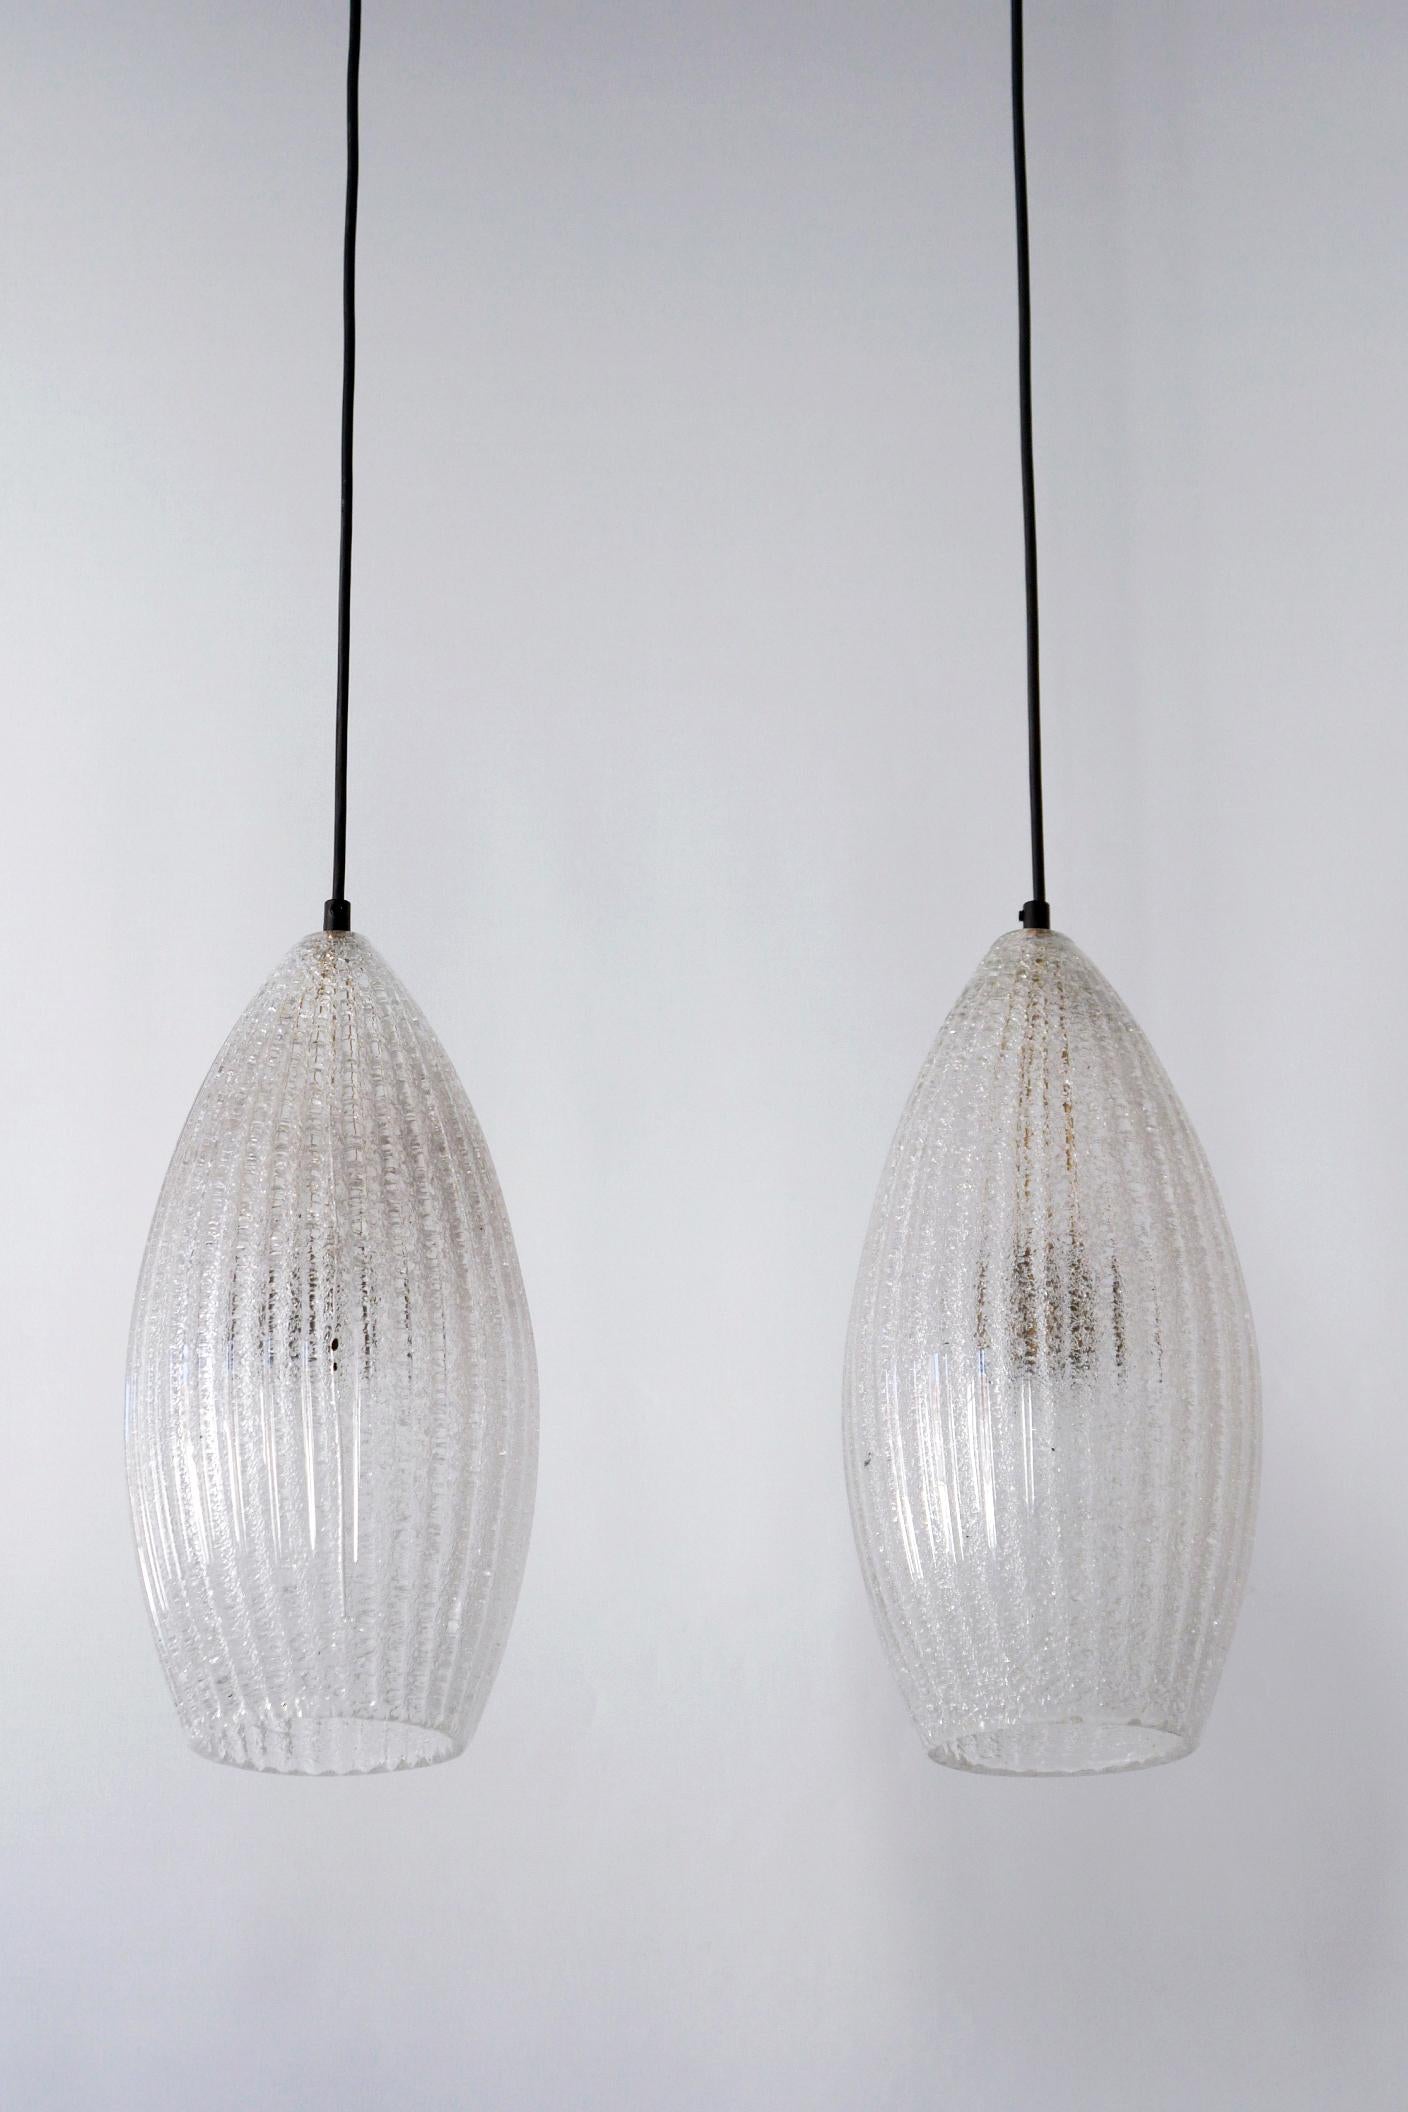 Set of Two Mid-Century Modern Textured Glass Pendant Lamps, 1960s, Germany For Sale 10